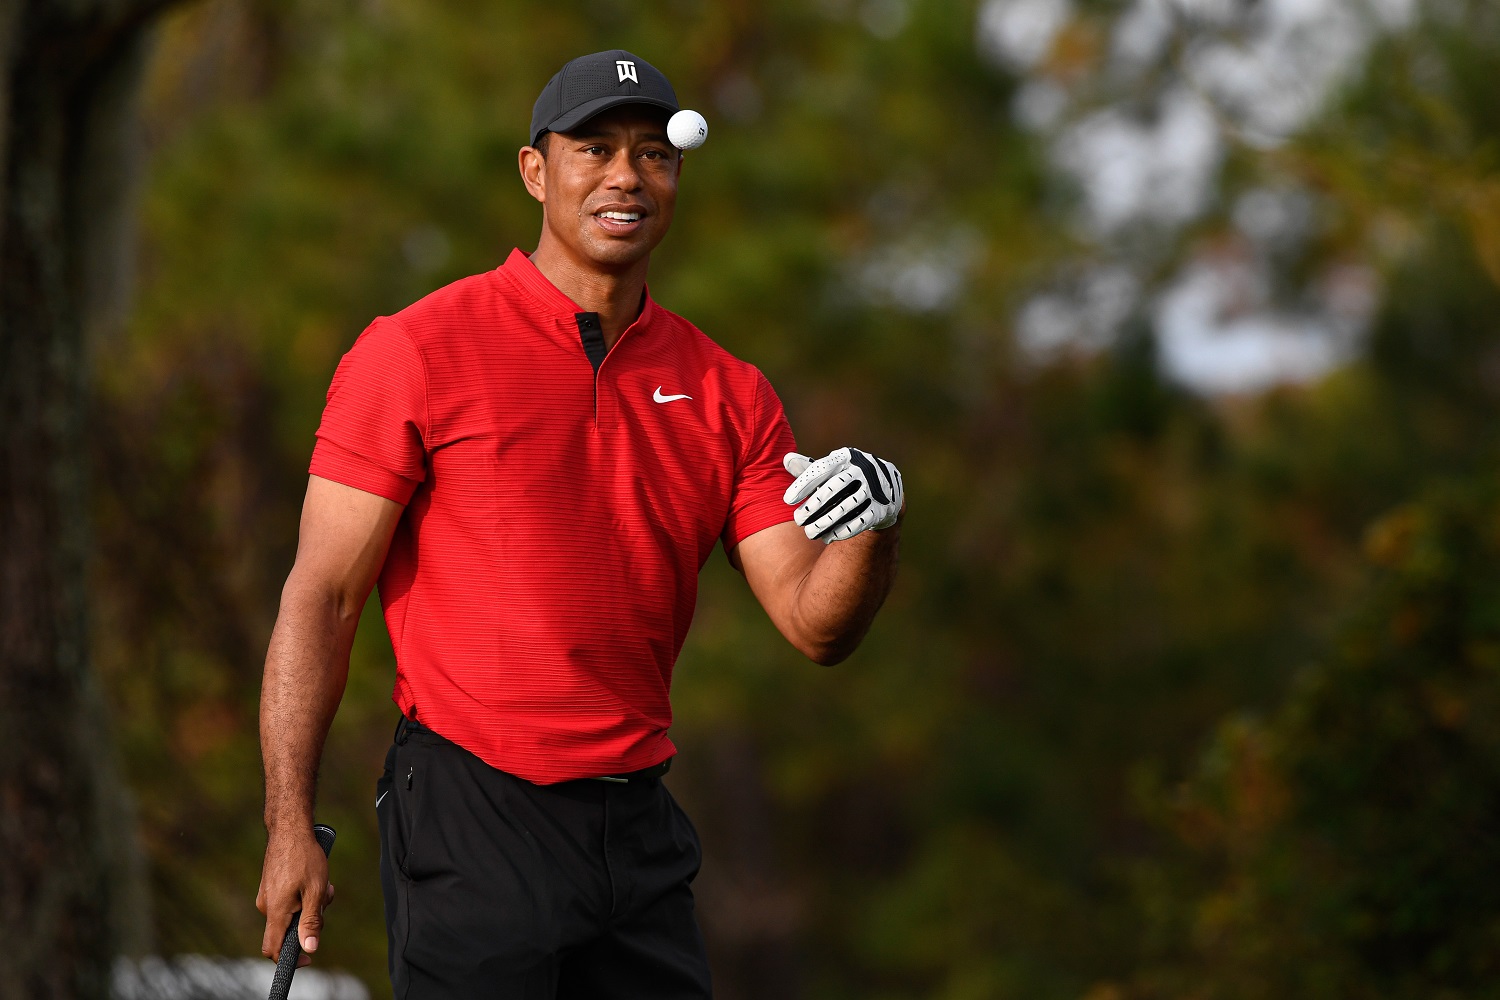 Tiger Woods catches a ball on the range during the final round of the PGA Tour Champions PNC Championship at Ritz-Carlton Golf Club on Dec. 20, 2020, in Orlando, Florida.